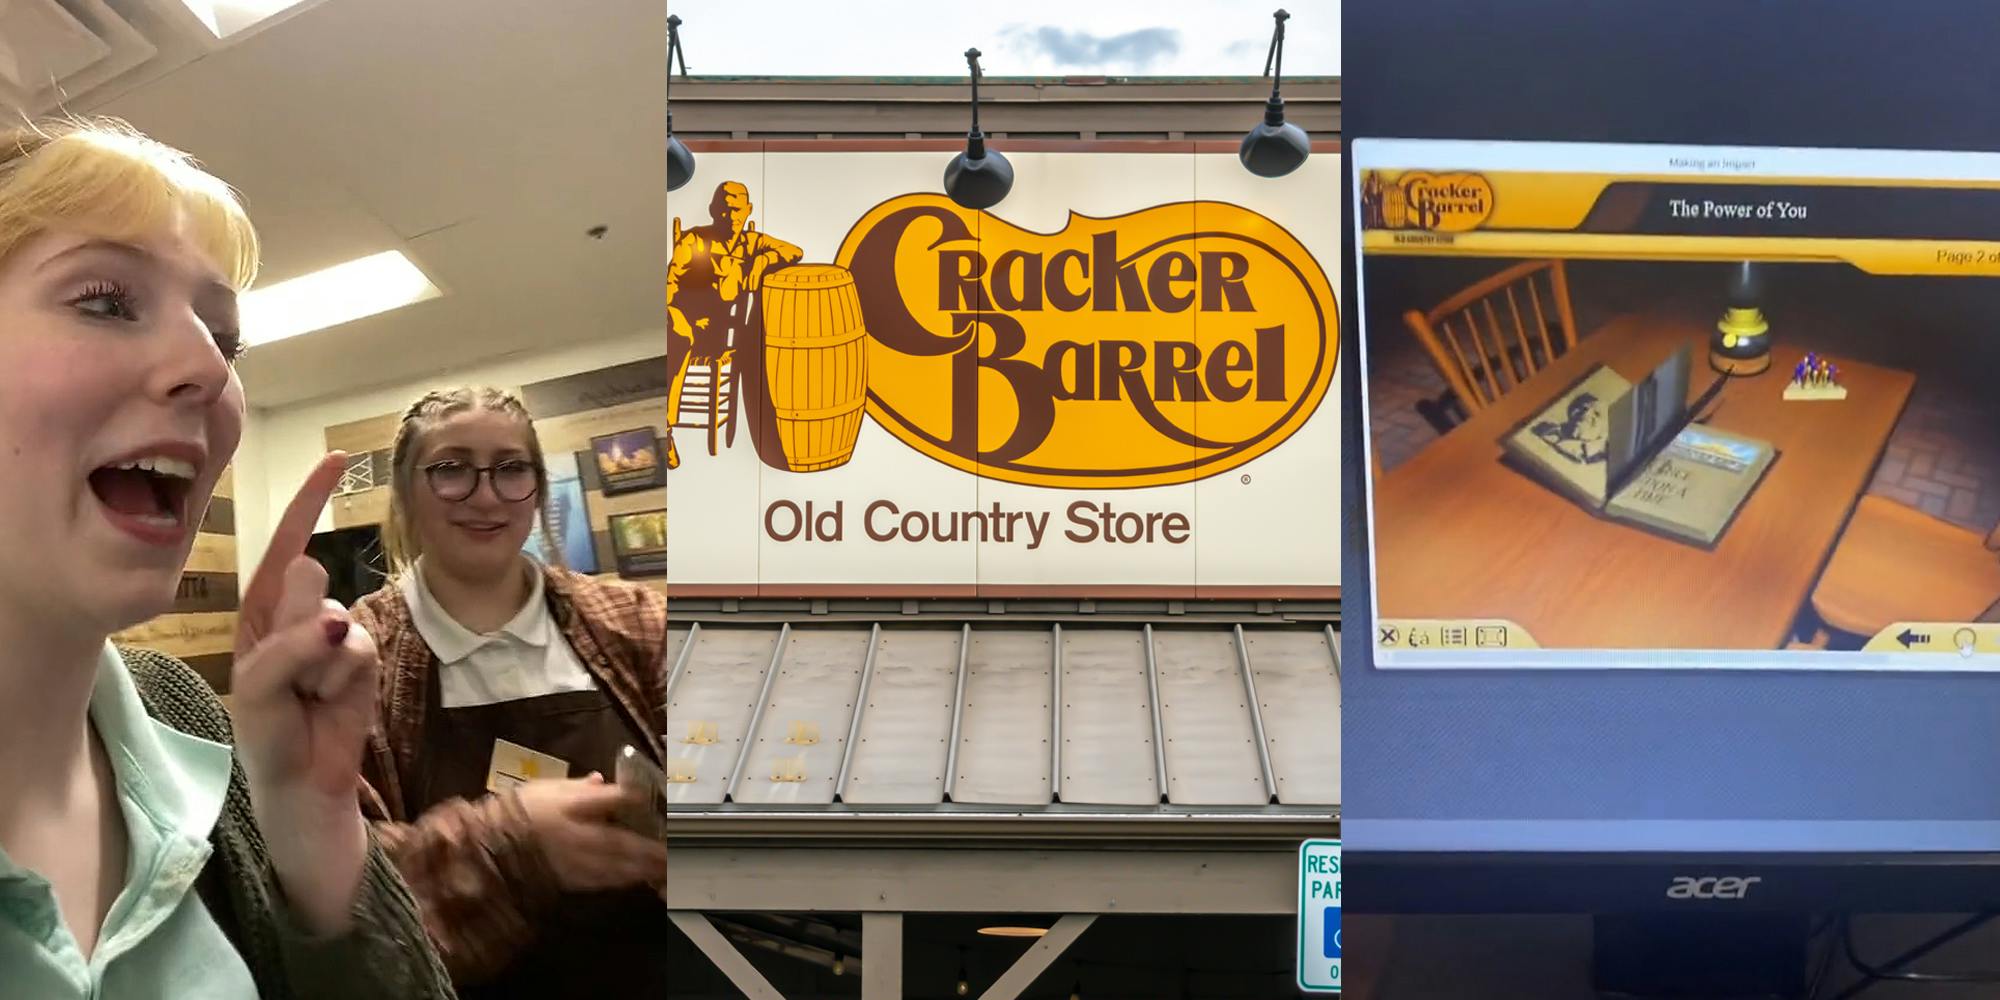 Cracker Barrel employees laughing and pointing right (l) Cracker Barrel sign on building (c) computer screen with "The Power Of You" Cracker Barrel training video playing (r)